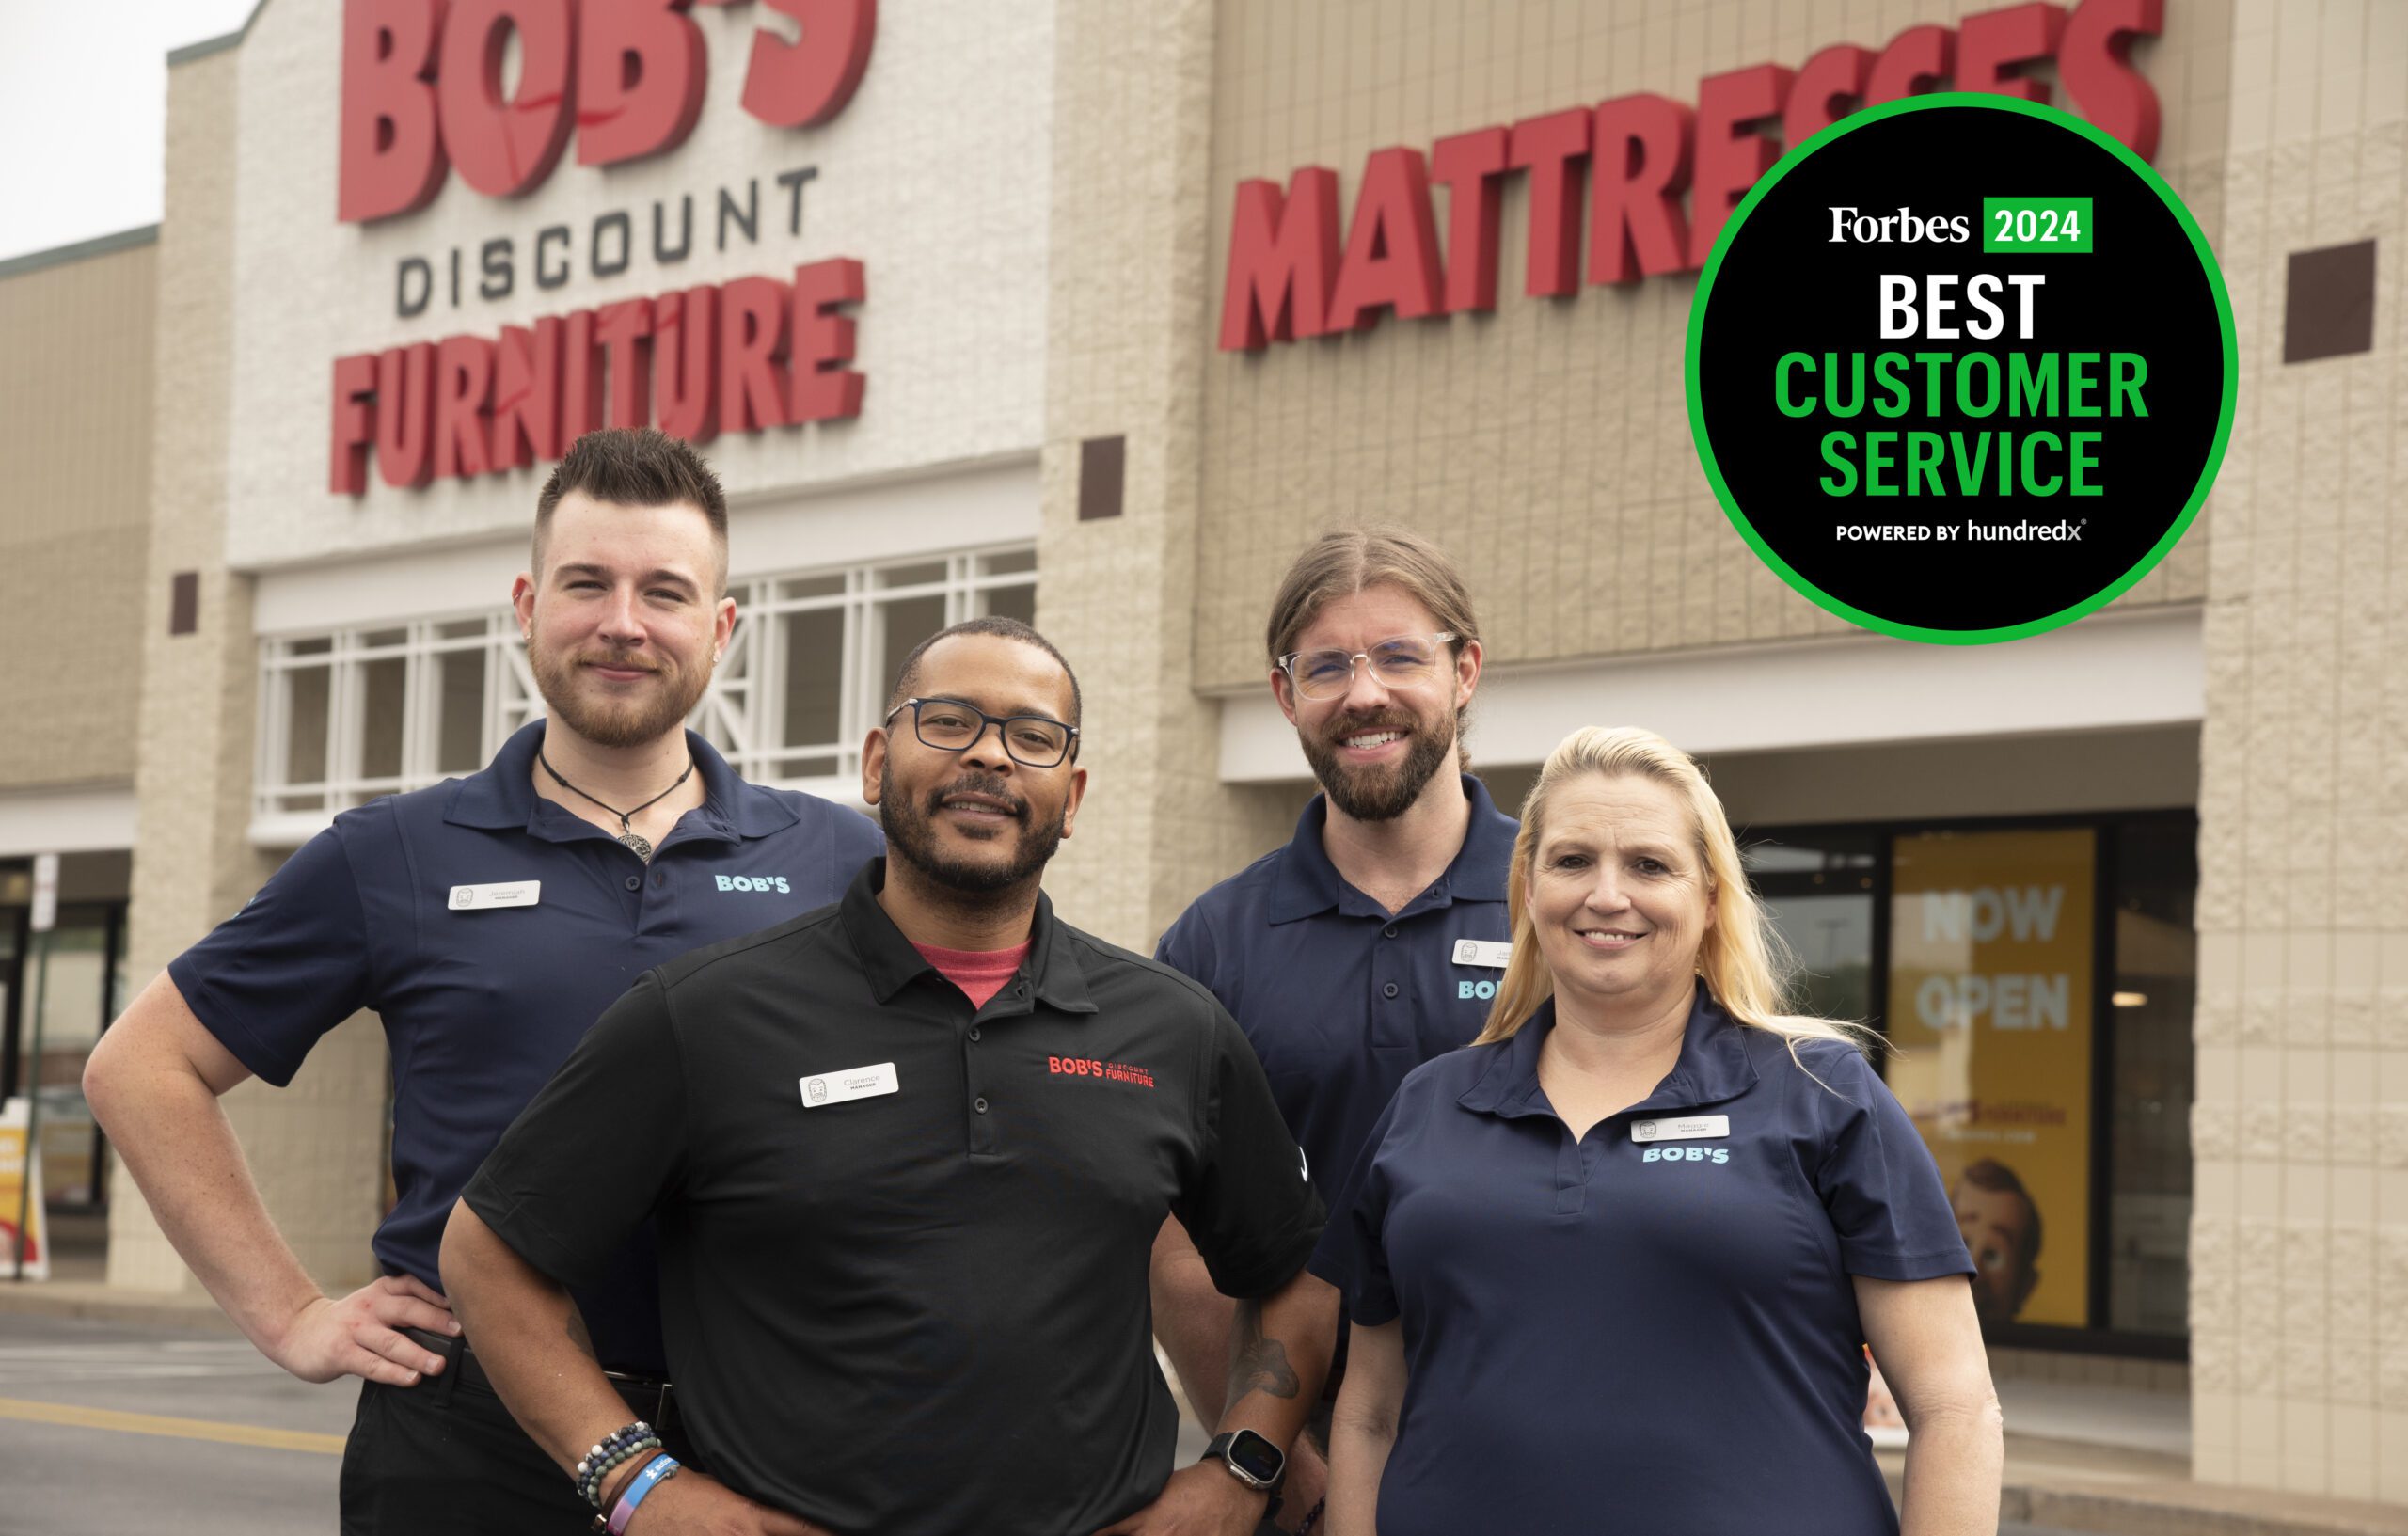 Bob’s Discount Furniture Recognized by Forbes for Best Customer Service